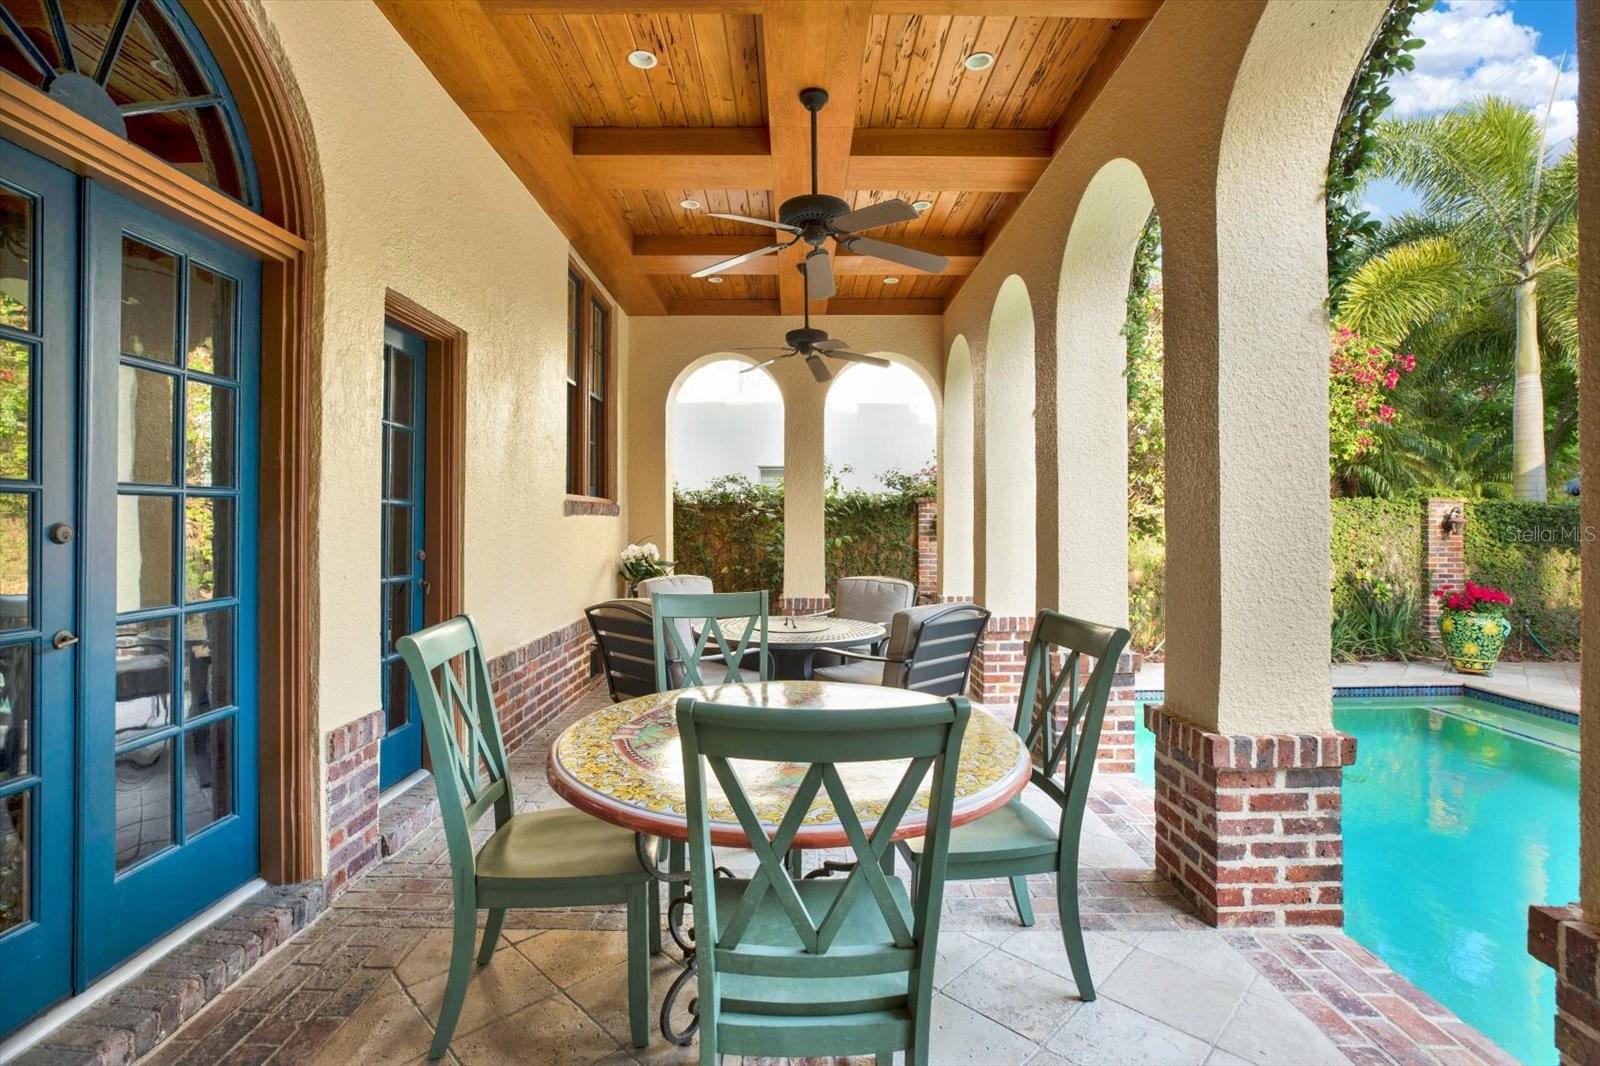 Covered Outdoor Dining Area